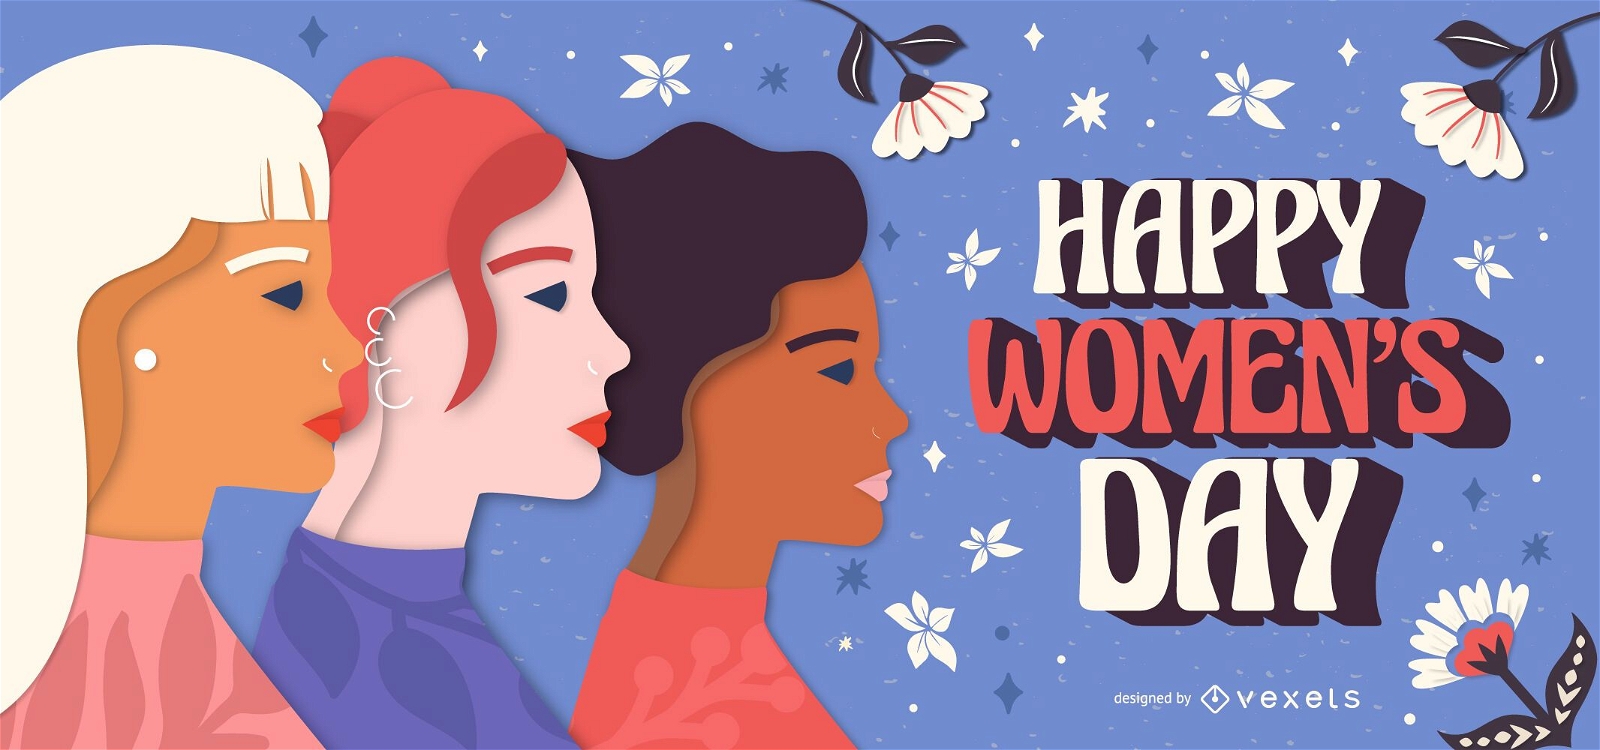 Different women characters Women's Day illustration